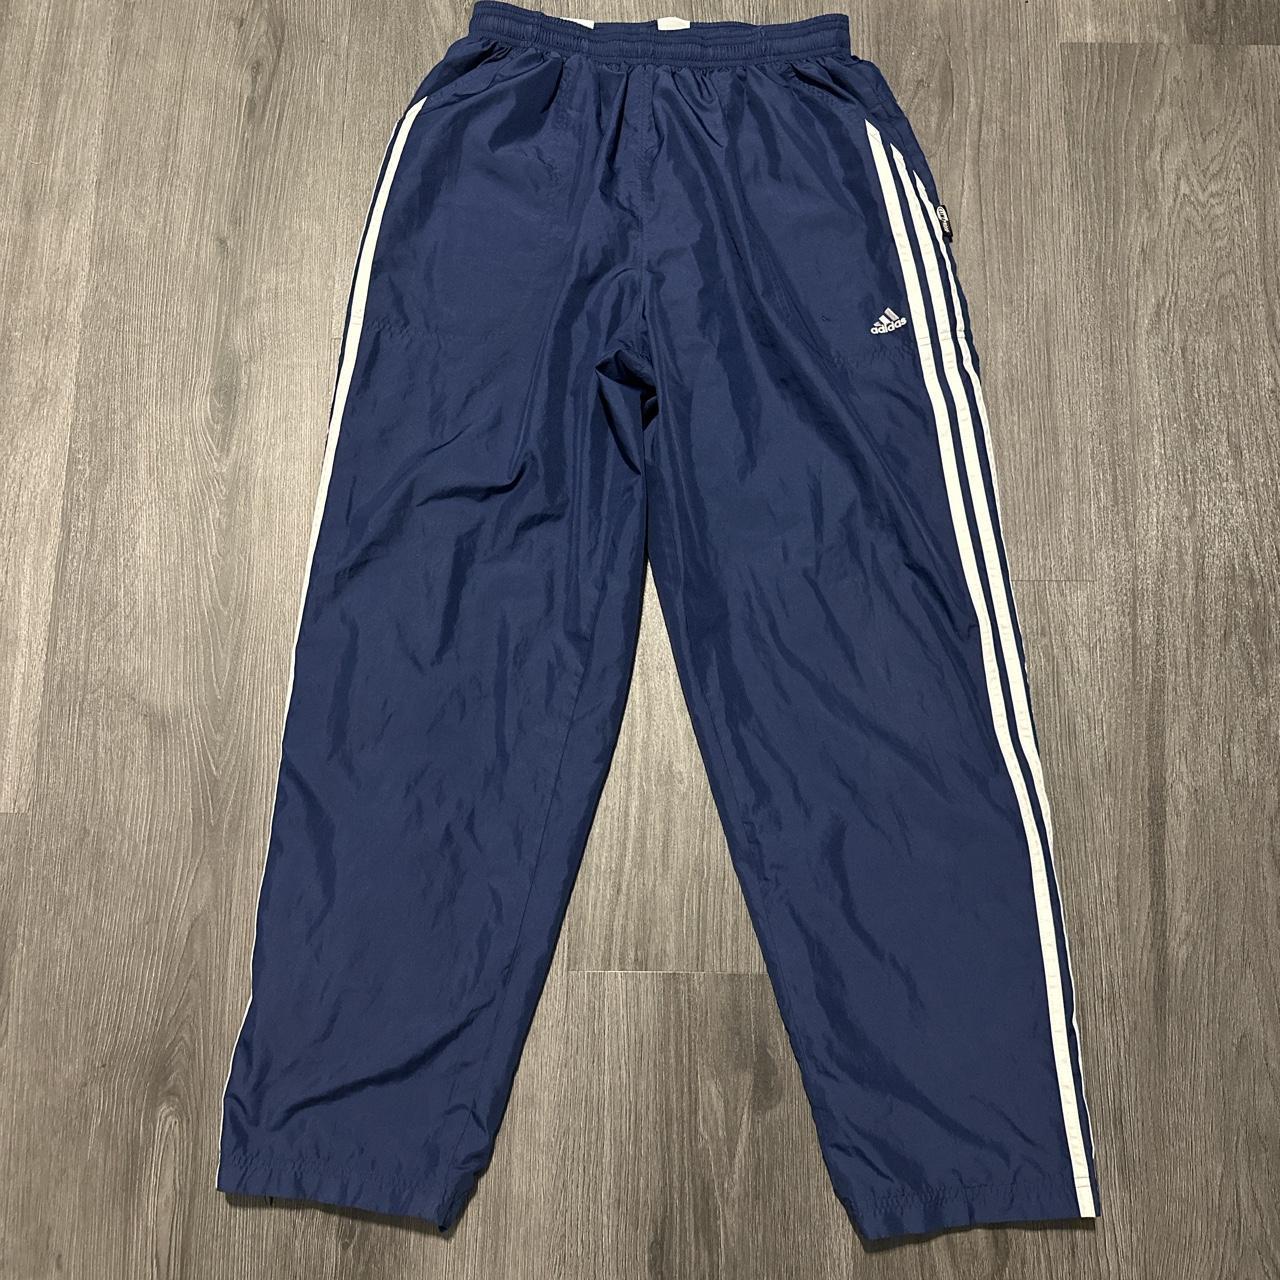 Vintage adidas track pants in good condition with a... - Depop